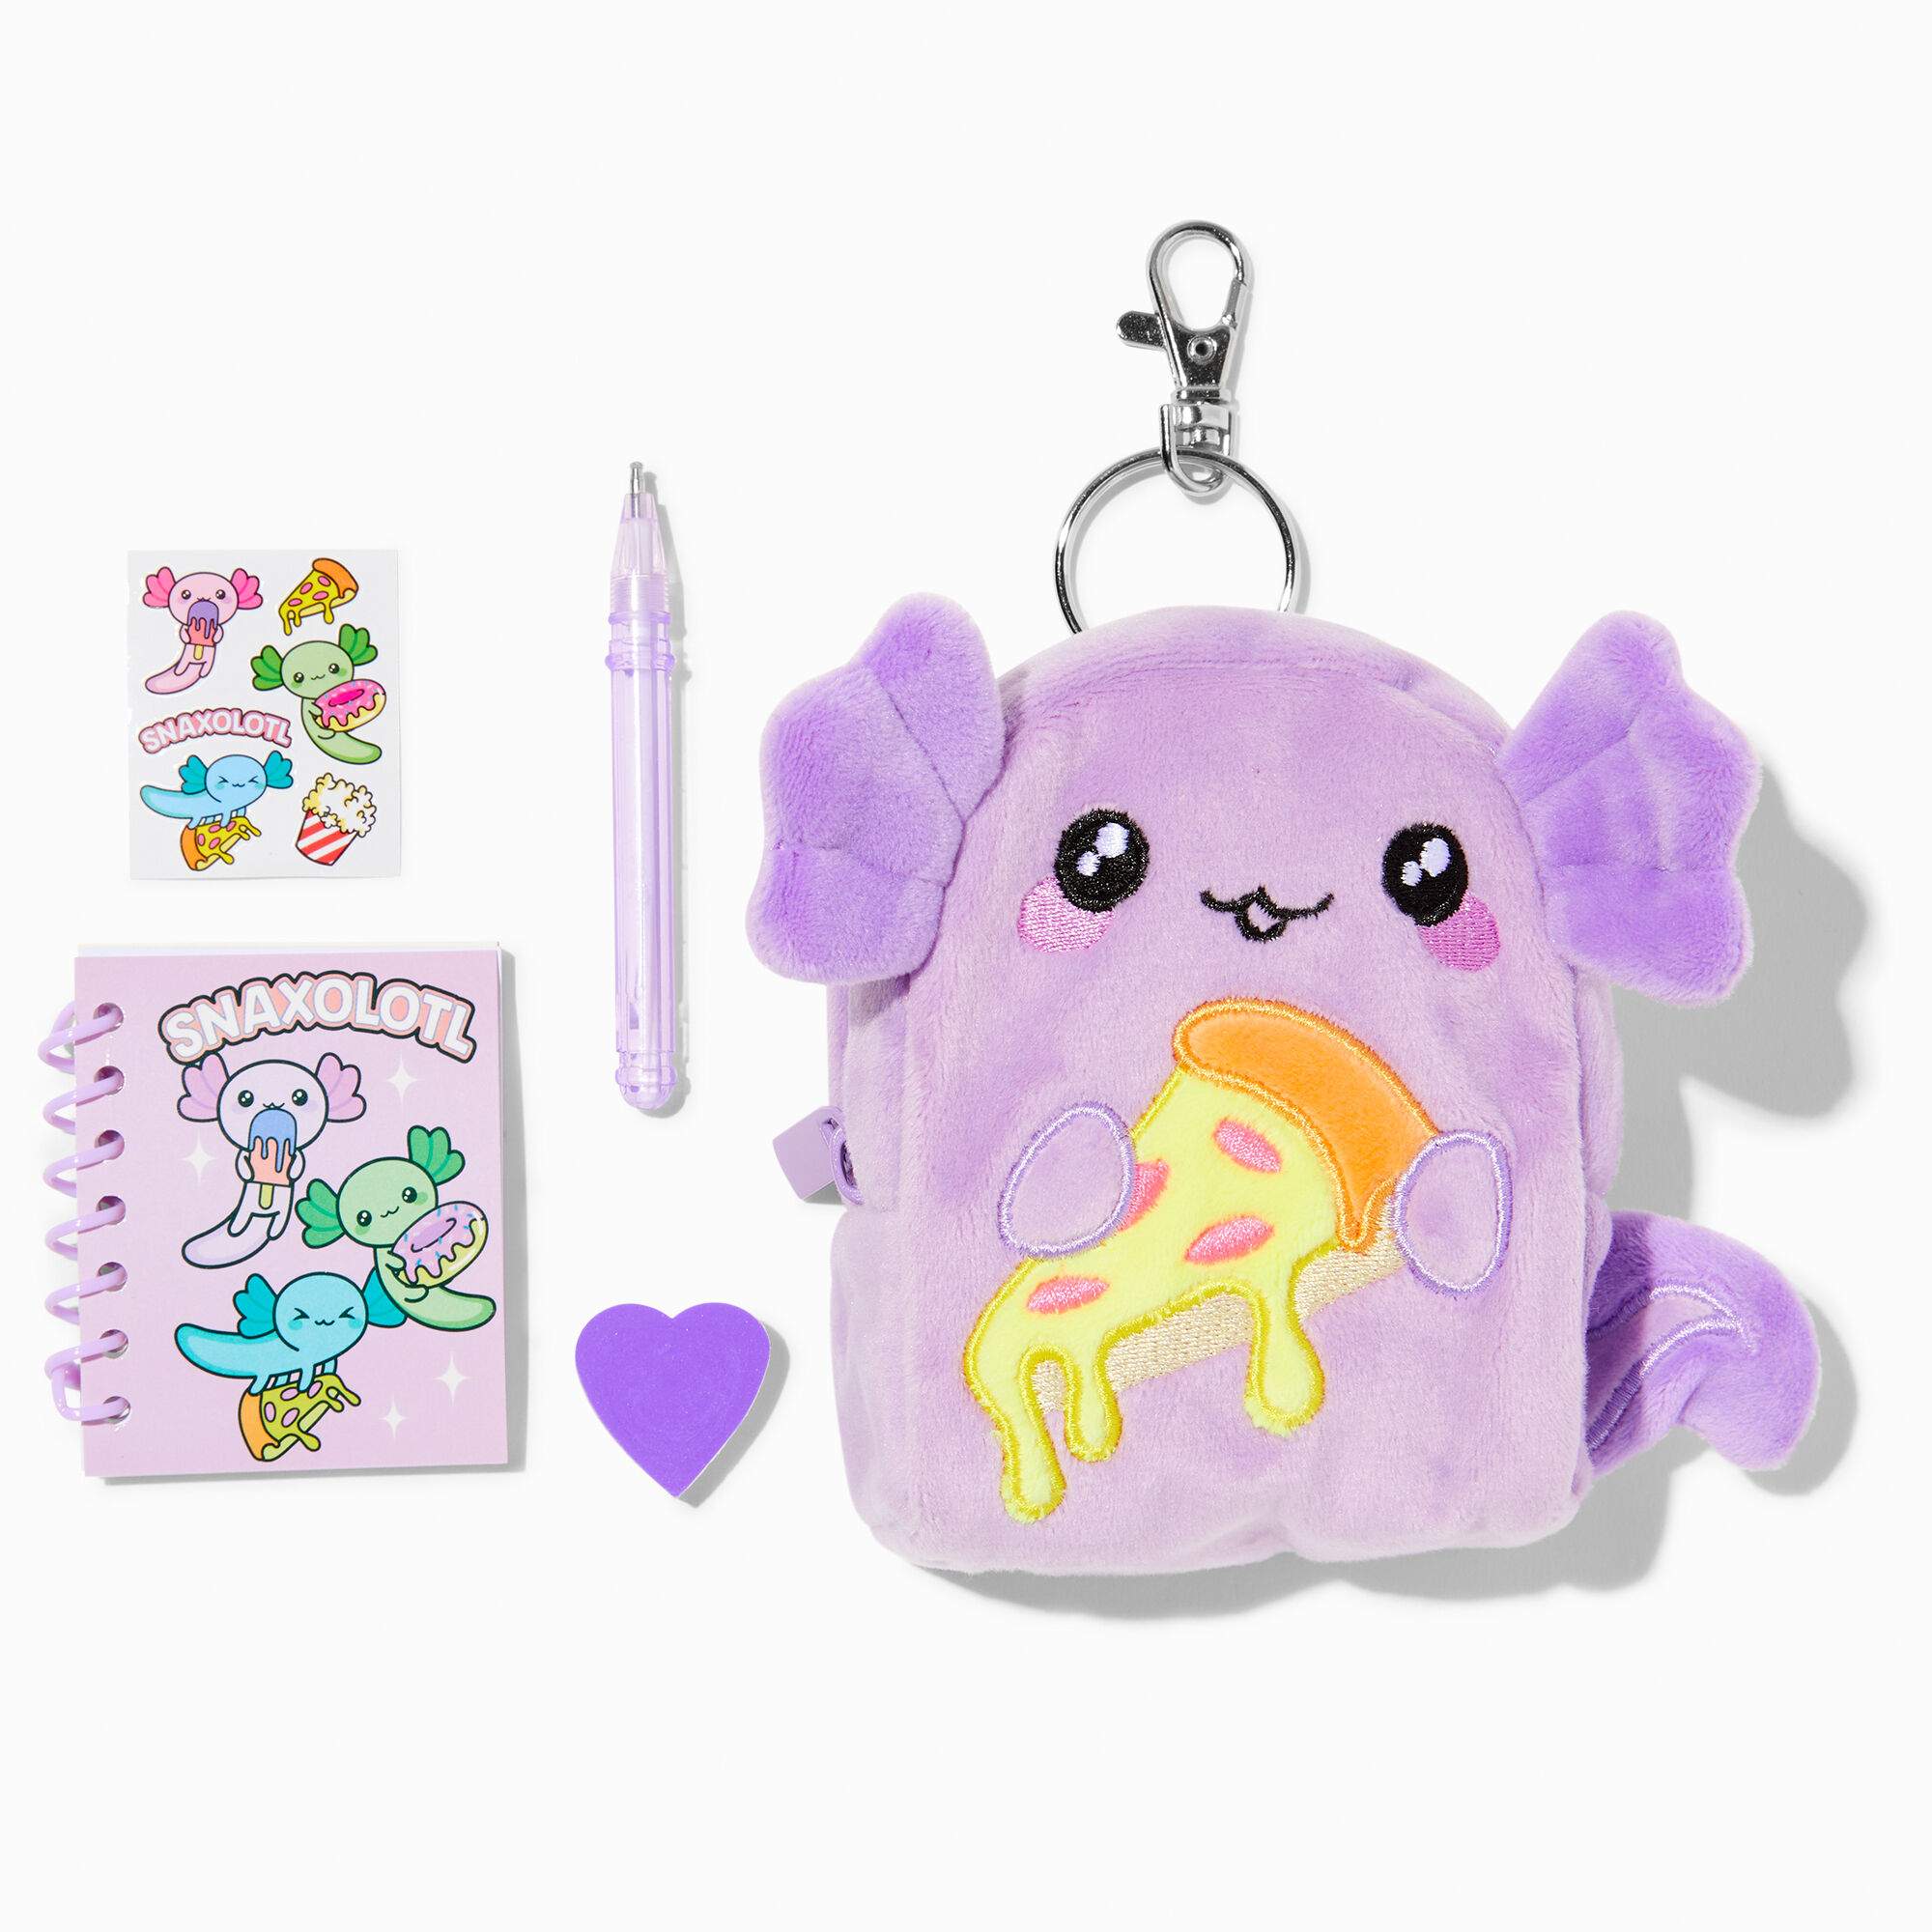 View Claires Pizza Axolotl 4 Backpack Stationery Set information